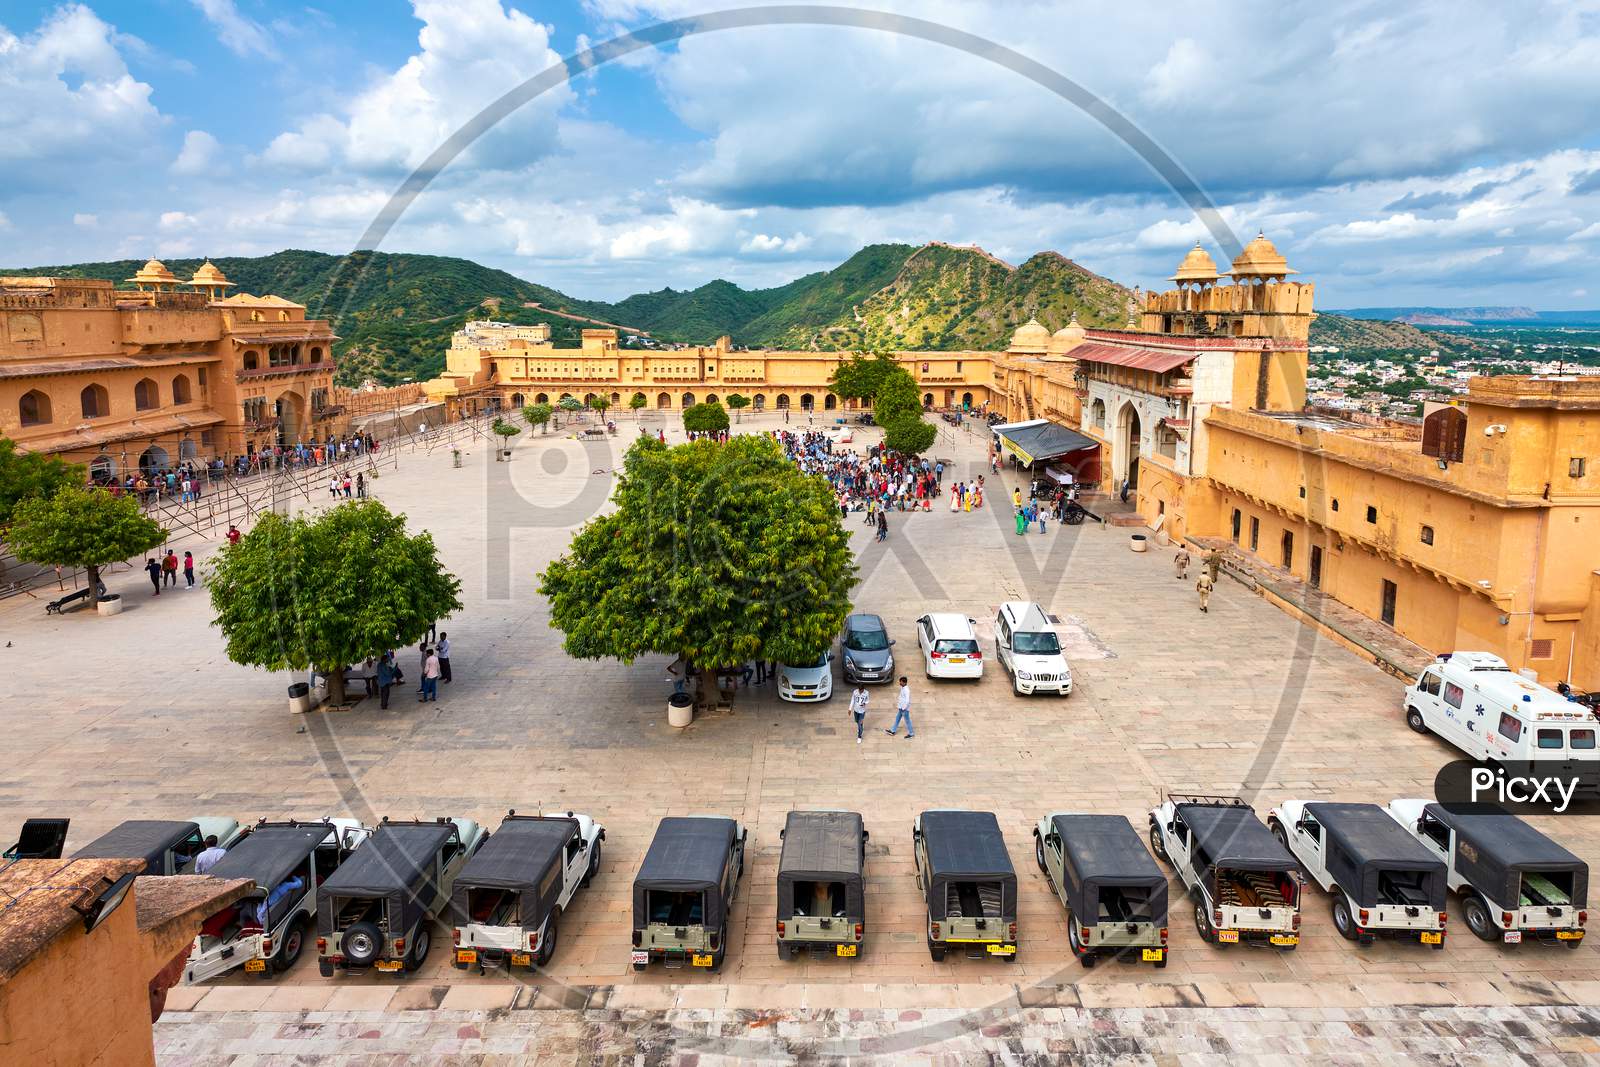 Courtyard In The Amer Fort In Jaipur, Rajasthan, India